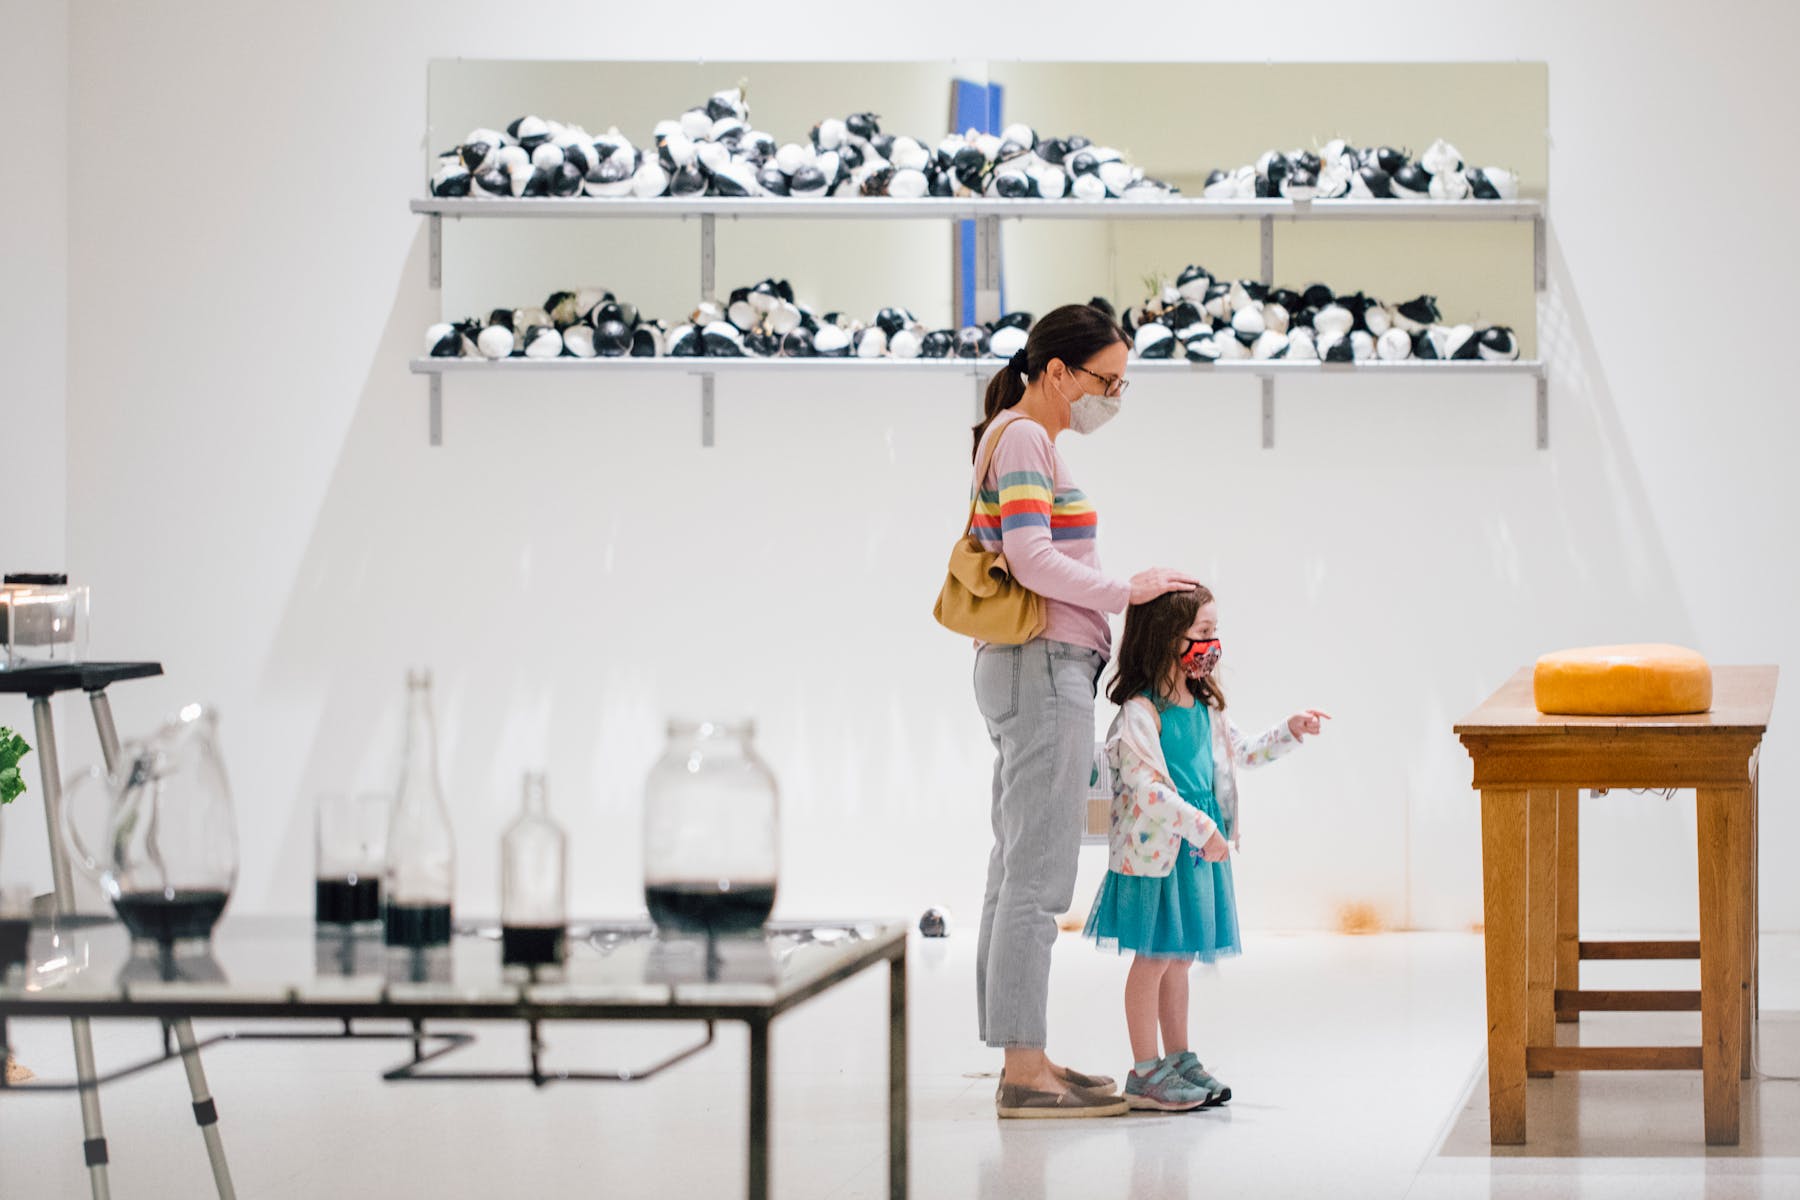 Woman and girl in gallery with beakers in the foreground